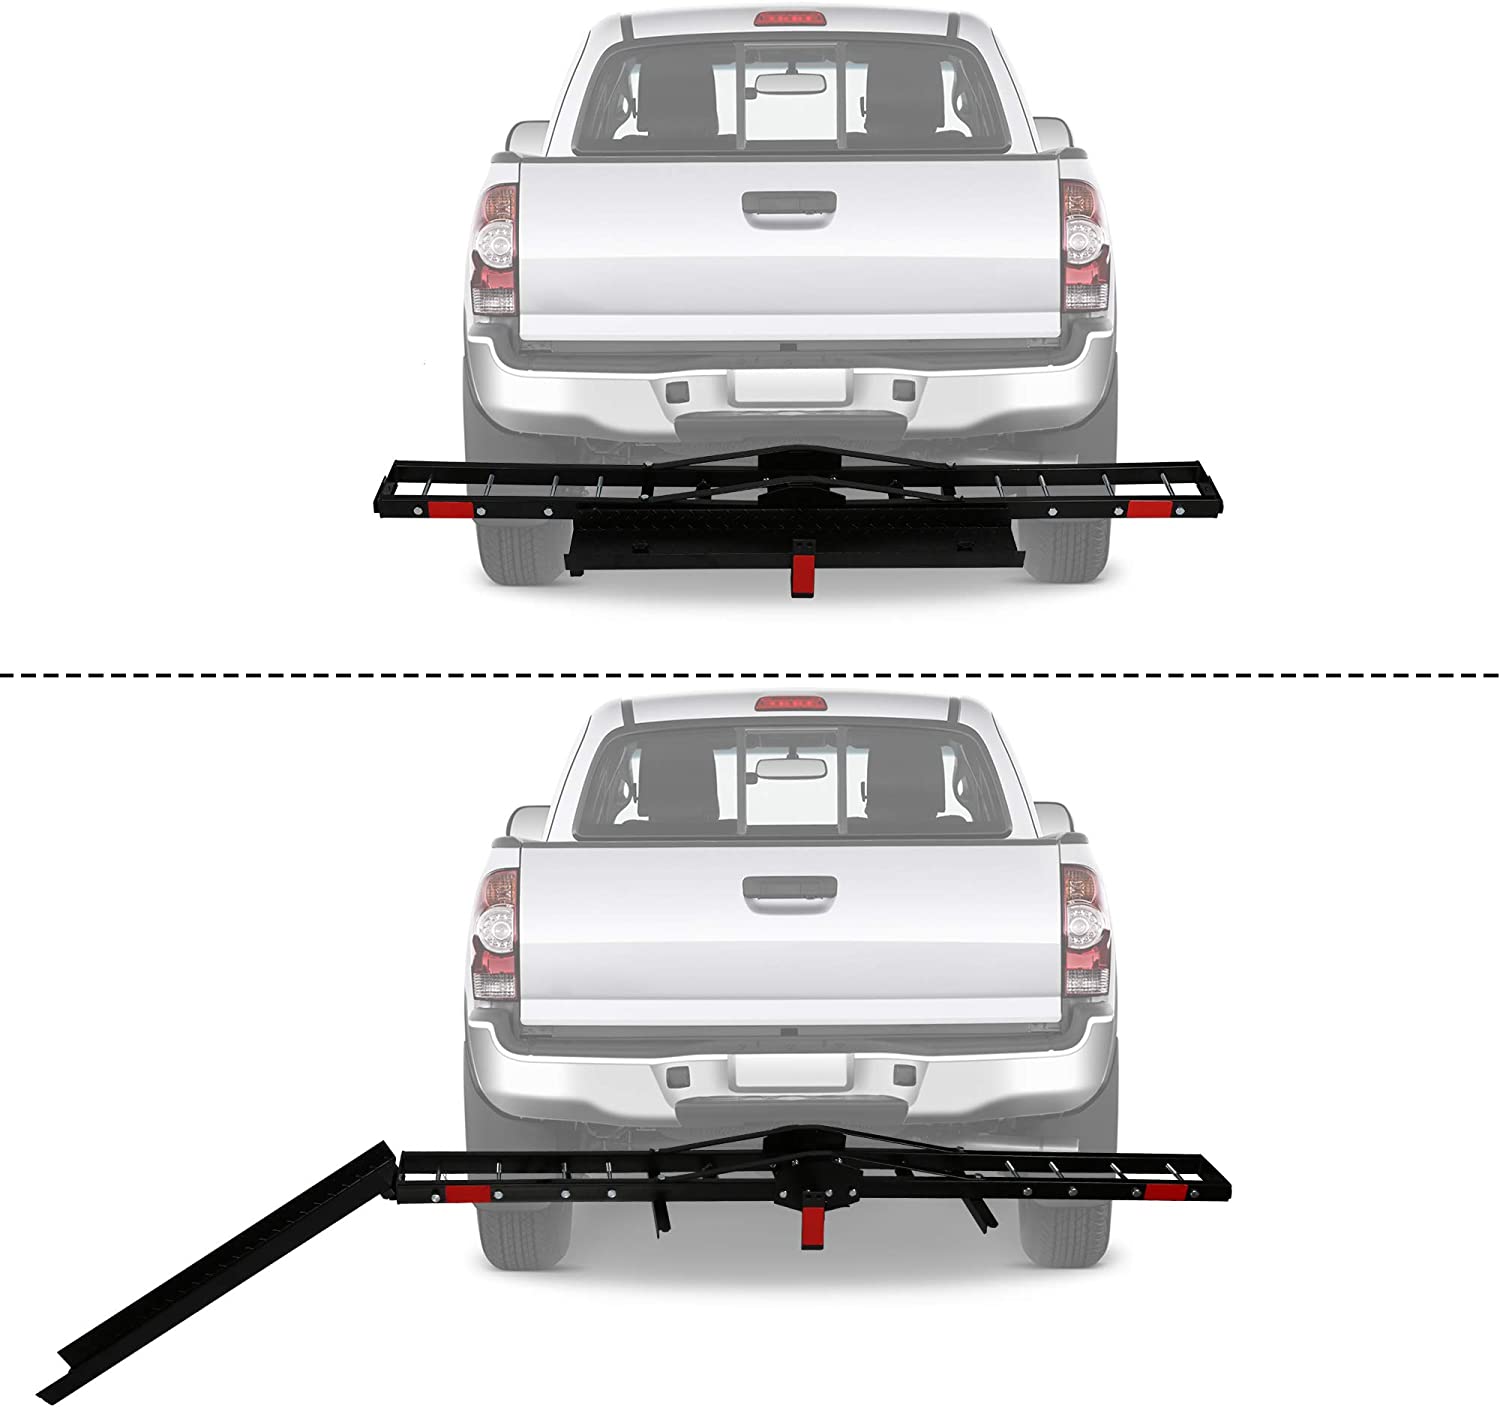 Motorcycle Rack Motorcycle Scooter Carrier Hauler Hitch Mount Rack with Loading Ramp Fit 2" Receiver of Cars, SUVs and Vans